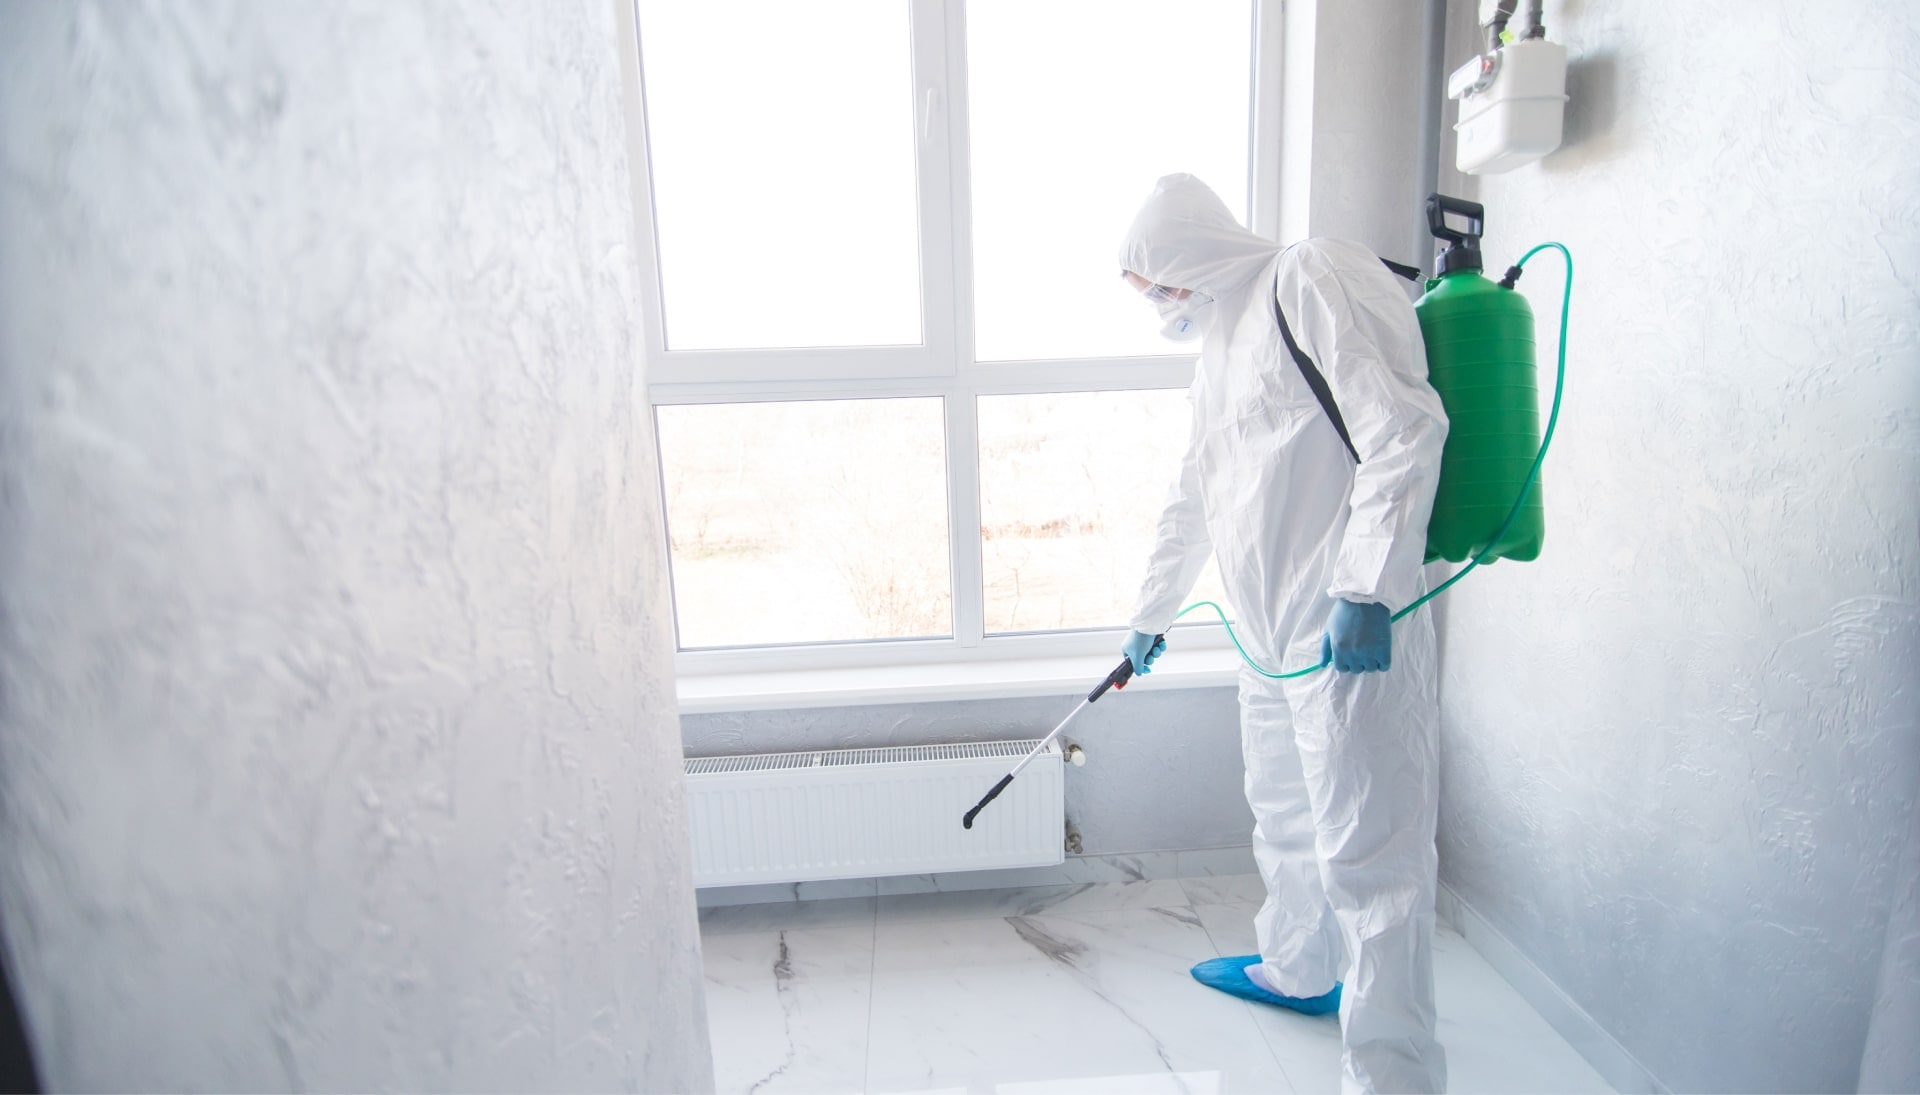 We provide the highest-quality mold inspection, testing, and removal services in the Brooklyn, New York area.